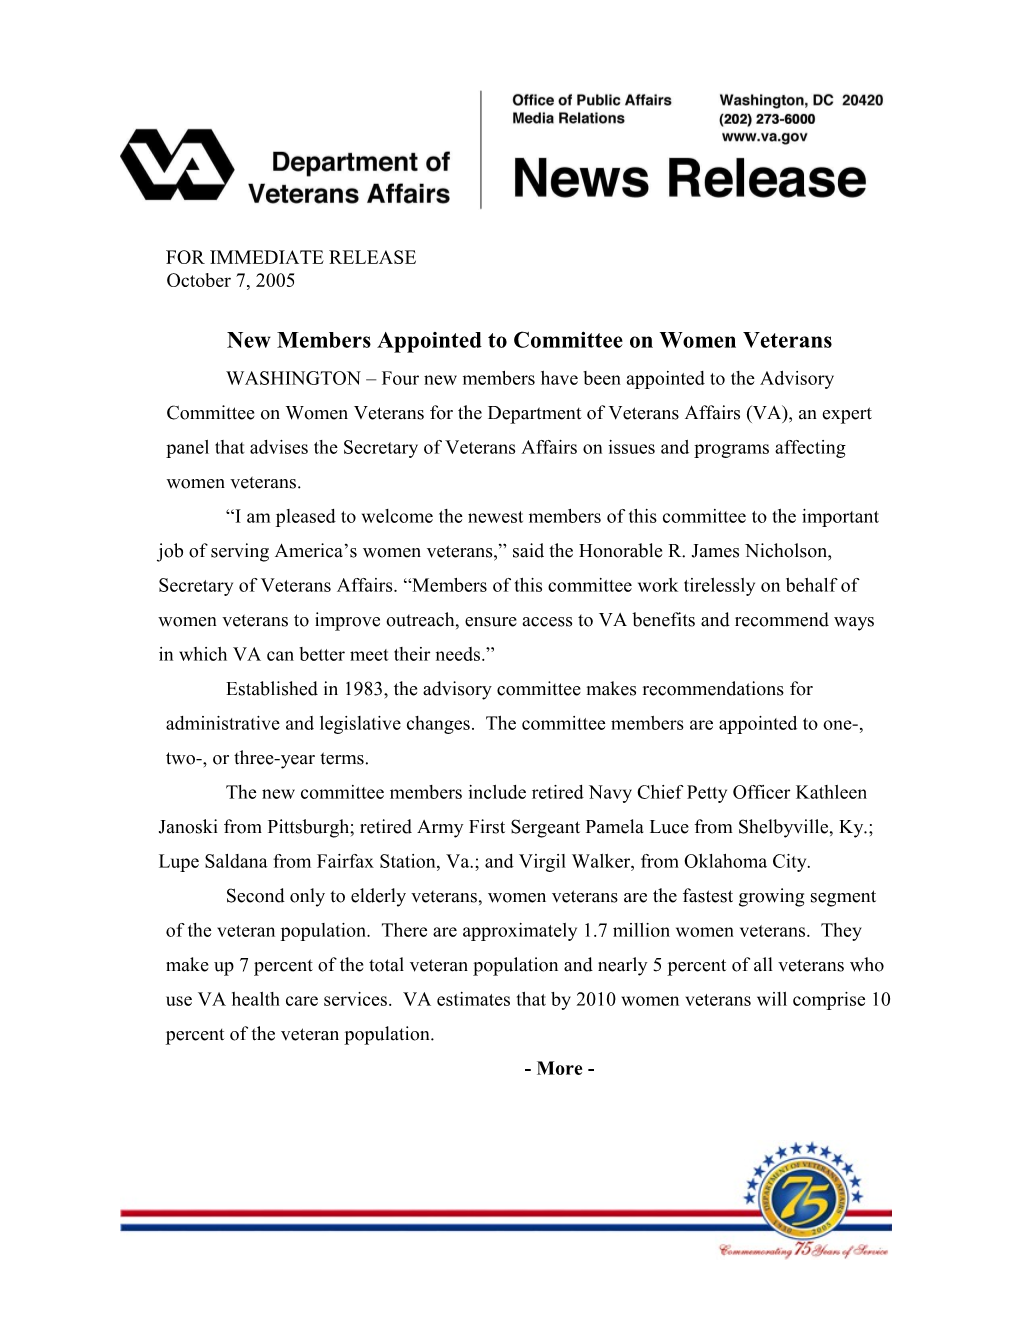 New Members Appointed to Committee on Women Veterans